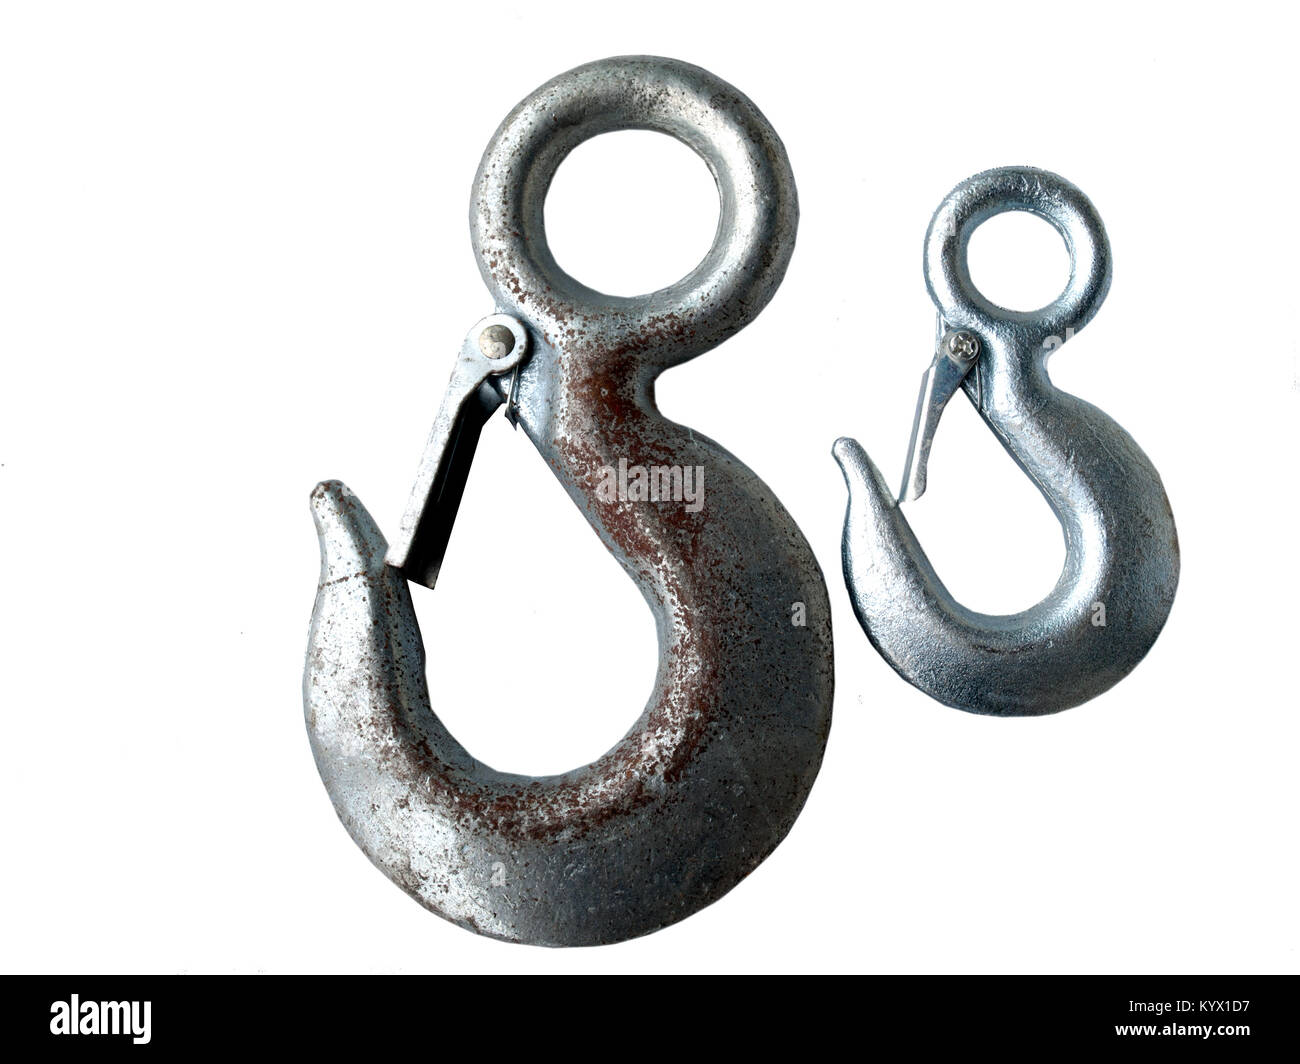 Towing hook Cut Out Stock Images & Pictures - Alamy